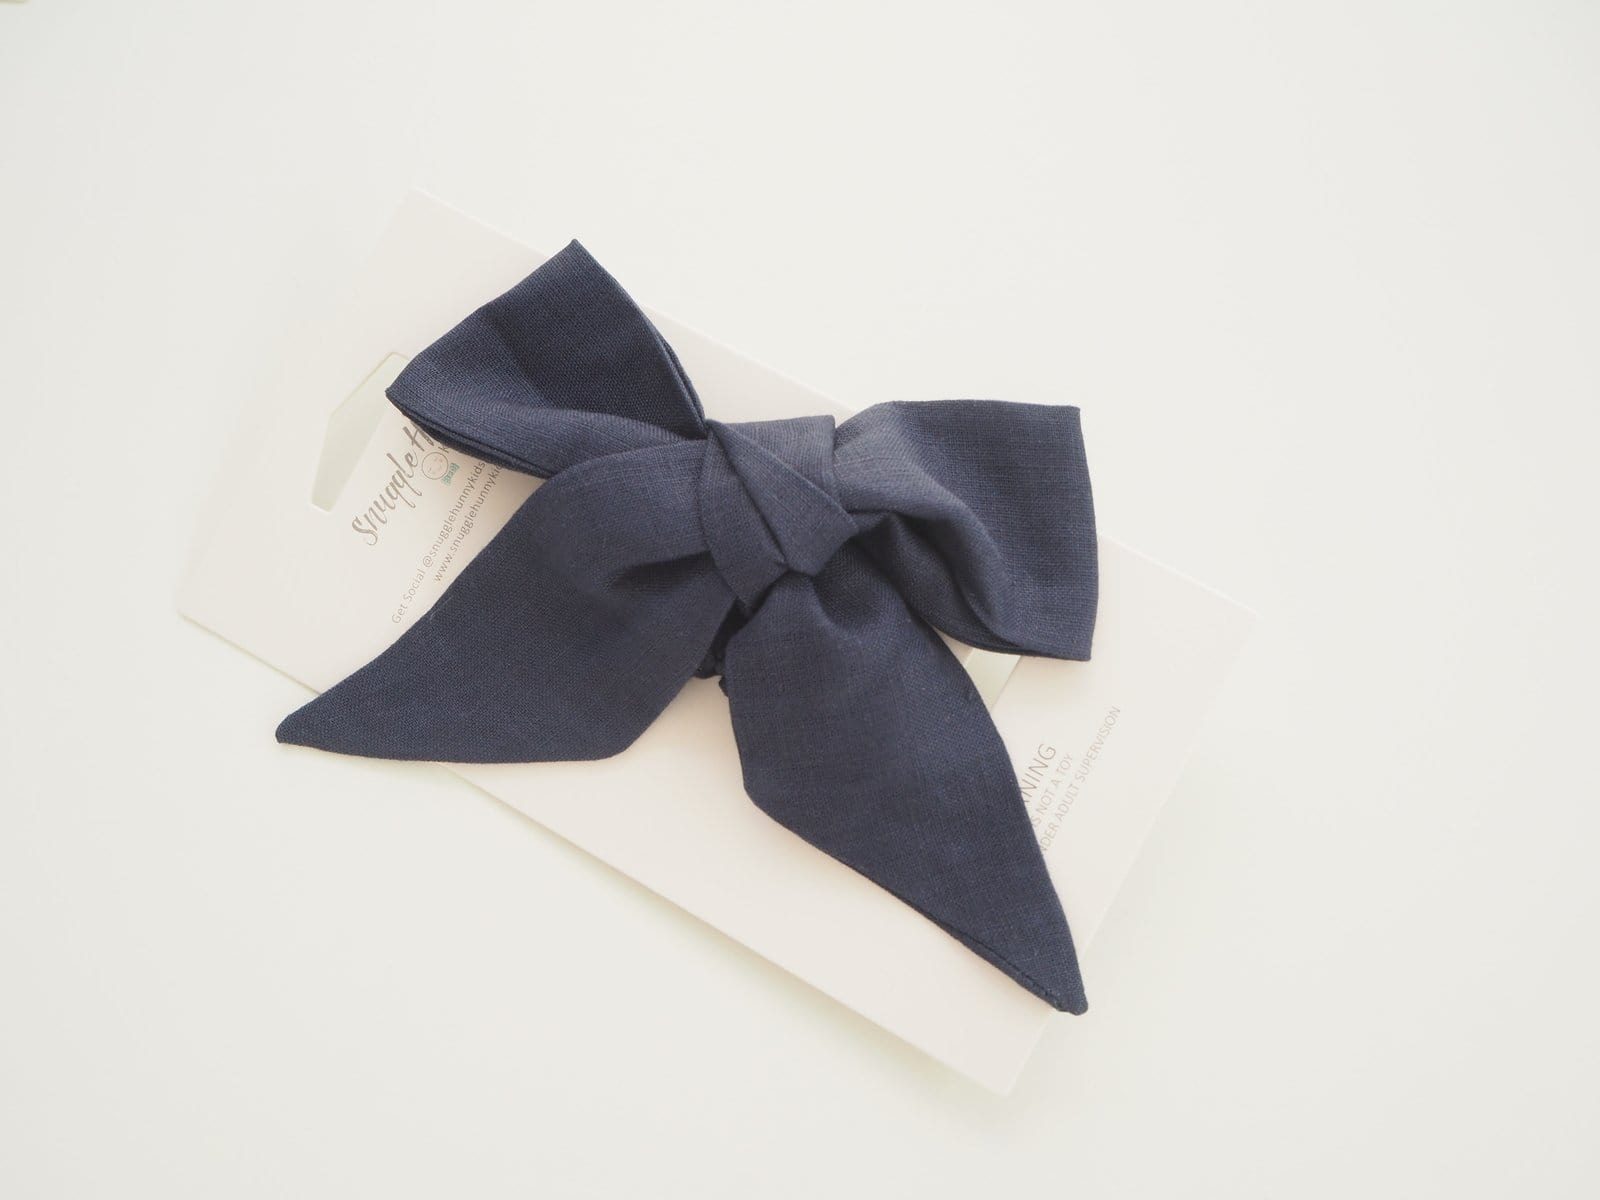 Snuggle Hunny Linen Pre Tied Headband - Parnell Baby Boutique